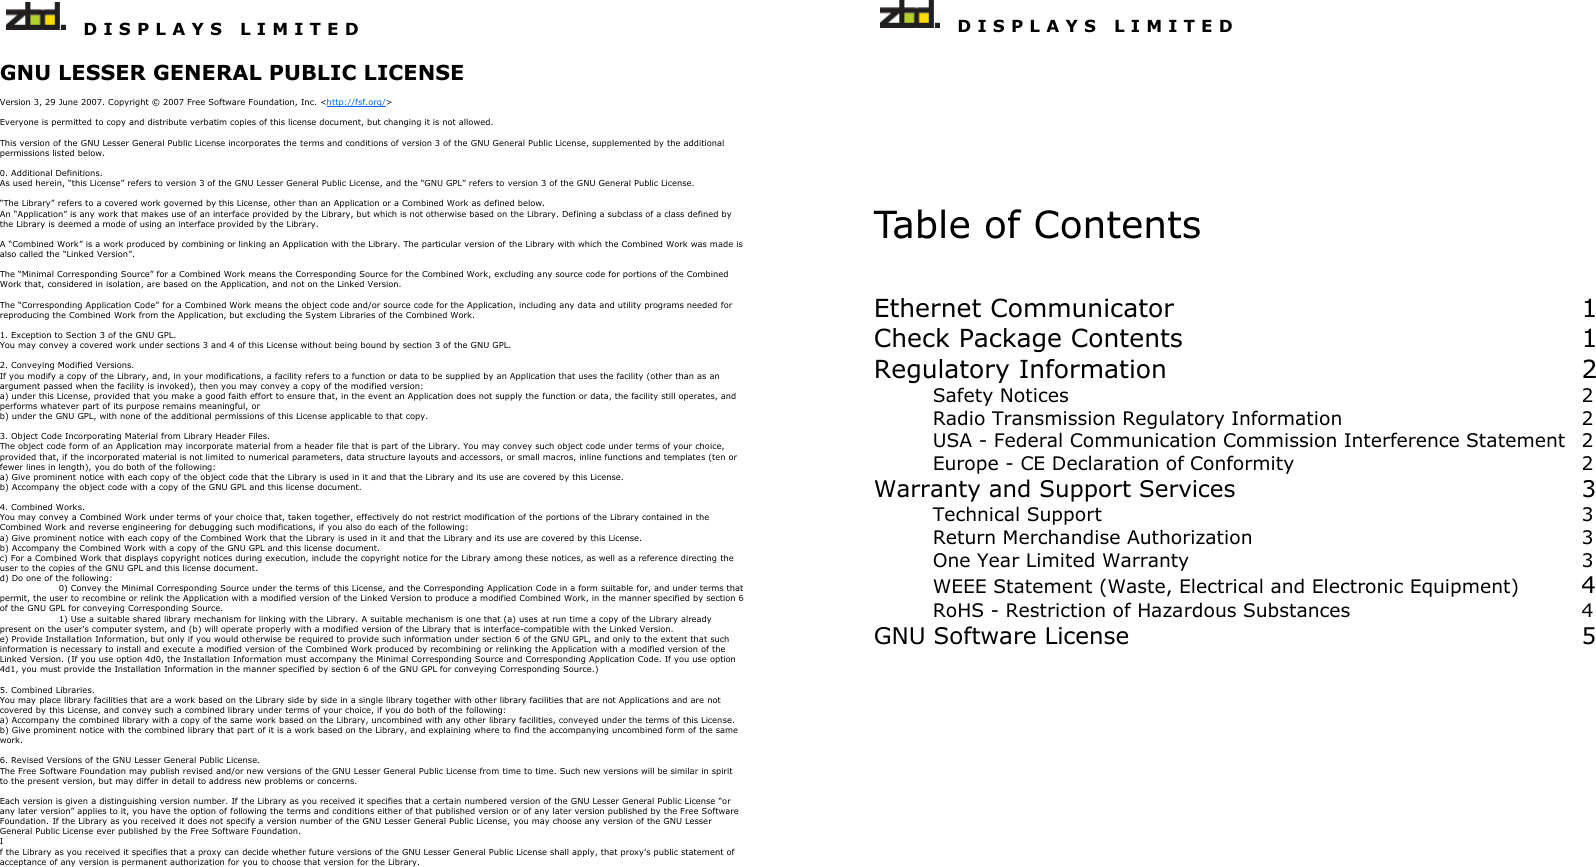   D I S P L A Y S   L I M I T E D   GNU LESSER GENERAL PUBLIC LICENSE  Version 3, 29 June 2007. Copyright © 2007 Free Software Foundation, Inc. &lt;http://fsf.org/&gt;  Everyone is permitted to copy and distribute verbatim copies of this license document, but changing it is not allowed.  This version of the GNU Lesser General Public License incorporates the terms and conditions of version 3 of the GNU General Public License, supplemented by the additional permissions listed below.  0. Additional Definitions. As used herein, “this License” refers to version 3 of the GNU Lesser General Public License, and the “GNU GPL” refers to version 3 of the GNU General Public License.  “The Library” refers to a covered work governed by this License, other than an Application or a Combined Work as defined below. An “Application” is any work that makes use of an interface provided by the Library, but which is not otherwise based on the Library. Defining a subclass of a class defined by the Library is deemed a mode of using an interface provided by the Library.  A “Combined Work” is a work produced by combining or linking an Application with the Library. The particular version of the Library with which the Combined Work was made is also called the “Linked Version”.  The “Minimal Corresponding Source” for a Combined Work means the Corresponding Source for the Combined Work, excluding any source code for portions of the Combined Work that, considered in isolation, are based on the Application, and not on the Linked Version.  The “Corresponding Application Code” for a Combined Work means the object code and/or source code for the Application, including any data and utility programs needed for reproducing the Combined Work from the Application, but excluding the System Libraries of the Combined Work.  1. Exception to Section 3 of the GNU GPL. You may convey a covered work under sections 3 and 4 of this License without being bound by section 3 of the GNU GPL.  2. Conveying Modified Versions. If you modify a copy of the Library, and, in your modifications, a facility refers to a function or data to be supplied by an Application that uses the facility (other than as an argument passed when the facility is invoked), then you may convey a copy of the modified version: a) under this License, provided that you make a good faith effort to ensure that, in the event an Application does not supply the function or data, the facility still operates, and performs whatever part of its purpose remains meaningful, or b) under the GNU GPL, with none of the additional permissions of this License applicable to that copy.  3. Object Code Incorporating Material from Library Header Files. The object code form of an Application may incorporate material from a header file that is part of the Library. You may convey such object code under terms of your choice, provided that, if the incorporated material is not limited to numerical parameters, data structure layouts and accessors, or small macros, inline functions and templates (ten or fewer lines in length), you do both of the following: a) Give prominent notice with each copy of the object code that the Library is used in it and that the Library and its use are covered by this License. b) Accompany the object code with a copy of the GNU GPL and this license document.  4. Combined Works. You may convey a Combined Work under terms of your choice that, taken together, effectively do not restrict modification of the portions of the Library contained in the Combined Work and reverse engineering for debugging such modifications, if you also do each of the following: a) Give prominent notice with each copy of the Combined Work that the Library is used in it and that the Library and its use are covered by this License. b) Accompany the Combined Work with a copy of the GNU GPL and this license document. c) For a Combined Work that displays copyright notices during execution, include the copyright notice for the Library among these notices, as well as a reference directing the user to the copies of the GNU GPL and this license document. d) Do one of the following:    0) Convey the Minimal Corresponding Source under the terms of this License, and the Corresponding Application Code in a form suitable for, and under terms that permit, the user to recombine or relink the Application with a modified version of the Linked Version to produce a modified Combined Work, in the manner specified by section 6 of the GNU GPL for conveying Corresponding Source.   1) Use a suitable shared library mechanism for linking with the Library. A suitable mechanism is one that (a) uses at run time a copy of the Library already present on the user&apos;s computer system, and (b) will operate properly with a modified version of the Library that is interface-compatible with the Linked Version. e) Provide Installation Information, but only if you would otherwise be required to provide such information under section 6 of the GNU GPL, and only to the extent that such information is necessary to install and execute a modified version of the Combined Work produced by recombining or relinking the Application with a modified version of the Linked Version. (If you use option 4d0, the Installation Information must accompany the Minimal Corresponding Source and Corresponding Application Code. If you use option 4d1, you must provide the Installation Information in the manner specified by section 6 of the GNU GPL for conveying Corresponding Source.)  5. Combined Libraries. You may place library facilities that are a work based on the Library side by side in a single library together with other library facilities that are not Applications and are not covered by this License, and convey such a combined library under terms of your choice, if you do both of the following: a) Accompany the combined library with a copy of the same work based on the Library, uncombined with any other library facilities, conveyed under the terms of this License. b) Give prominent notice with the combined library that part of it is a work based on the Library, and explaining where to find the accompanying uncombined form of the same work.  6. Revised Versions of the GNU Lesser General Public License. The Free Software Foundation may publish revised and/or new versions of the GNU Lesser General Public License from time to time. Such new versions will be similar in spirit to the present version, but may differ in detail to address new problems or concerns.  Each version is given a distinguishing version number. If the Library as you received it specifies that a certain numbered version of the GNU Lesser General Public License “or any later version” applies to it, you have the option of following the terms and conditions either of that published version or of any later version published by the Free Software Foundation. If the Library as you received it does not specify a version number of the GNU Lesser General Public License, you may choose any version of the GNU Lesser General Public License ever published by the Free Software Foundation. I f the Library as you received it specifies that a proxy can decide whether future versions of the GNU Lesser General Public License shall apply, that proxy&apos;s public statement of acceptance of any version is permanent authorization for you to choose that version for the Library.     D I S P L A Y S   L I M I T E D  Table of Contents  Ethernet Communicator              1 Check Package Contents              1 Regulatory Information               2 Safety Notices                  2 Radio Transmission Regulatory Information         2 USA - Federal Communication Commission Interference Statement  2 Europe - CE Declaration of Conformity          2 Warranty and Support Services            3 Technical Support                 3 Return Merchandise Authorization            3 One Year Limited Warranty              3 WEEE Statement (Waste, Electrical and Electronic Equipment)  4 RoHS - Restriction of Hazardous Substances        4 GNU Software License                5 